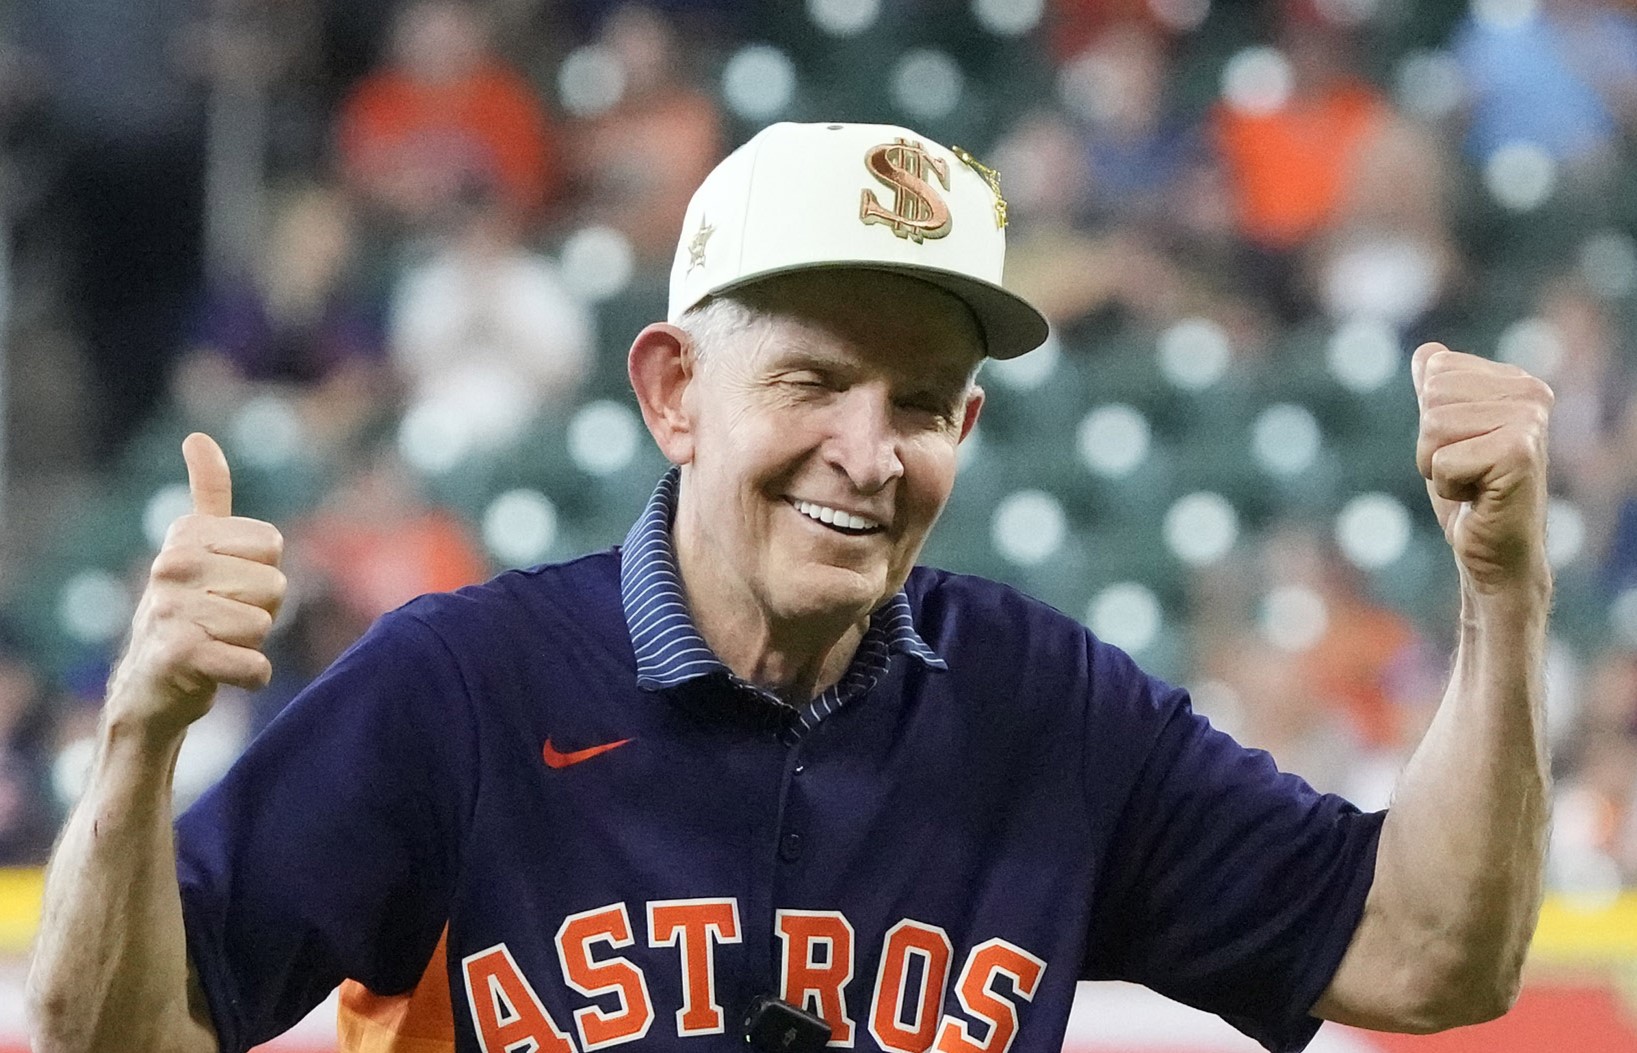 Mattress Mack don't play about the Houston Astros! The well know